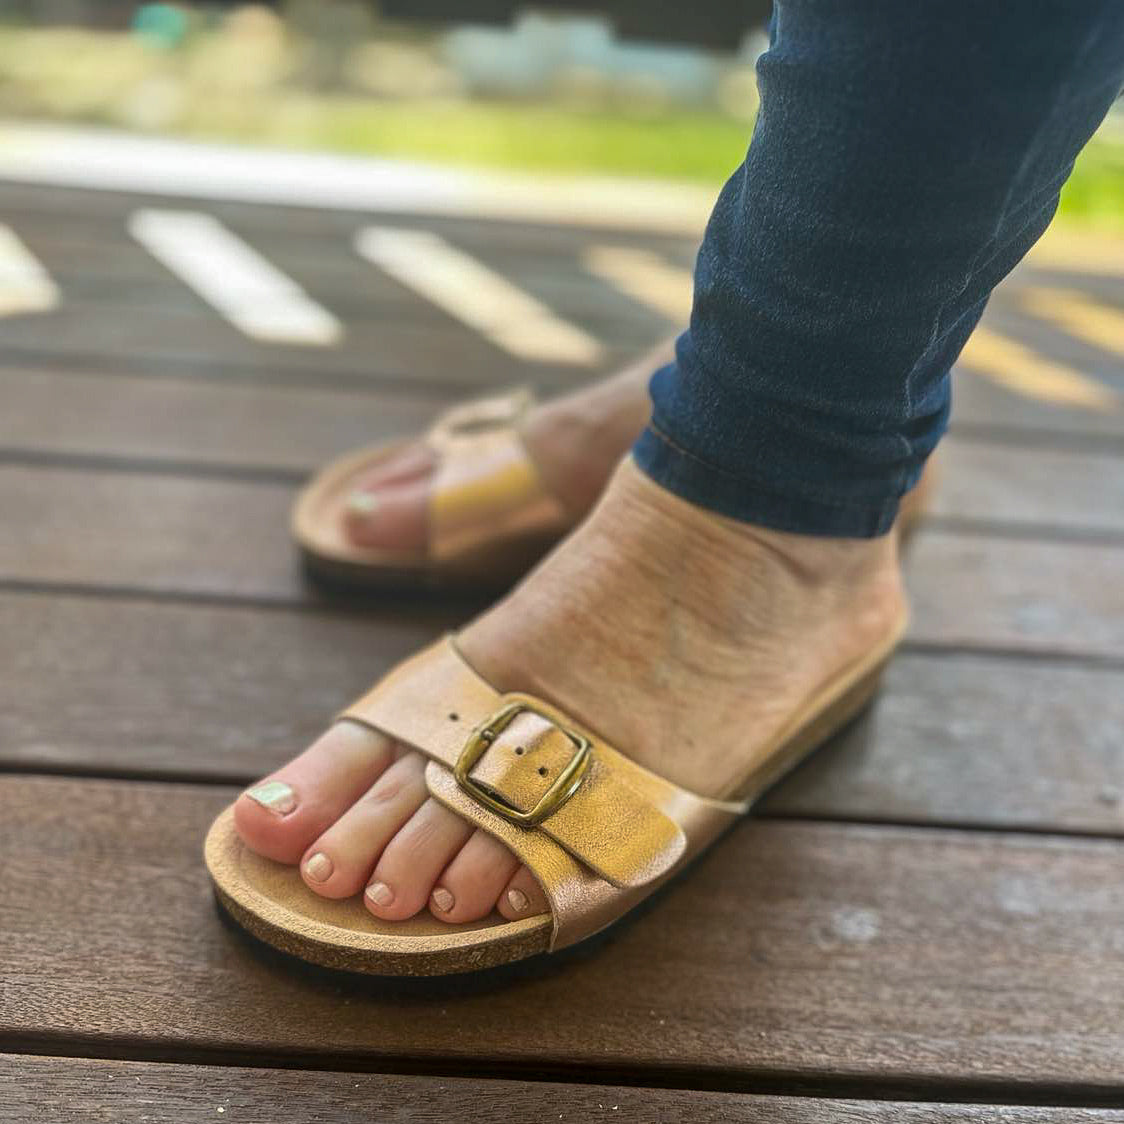 wearing-rose-gold-leather-sandals-side-view